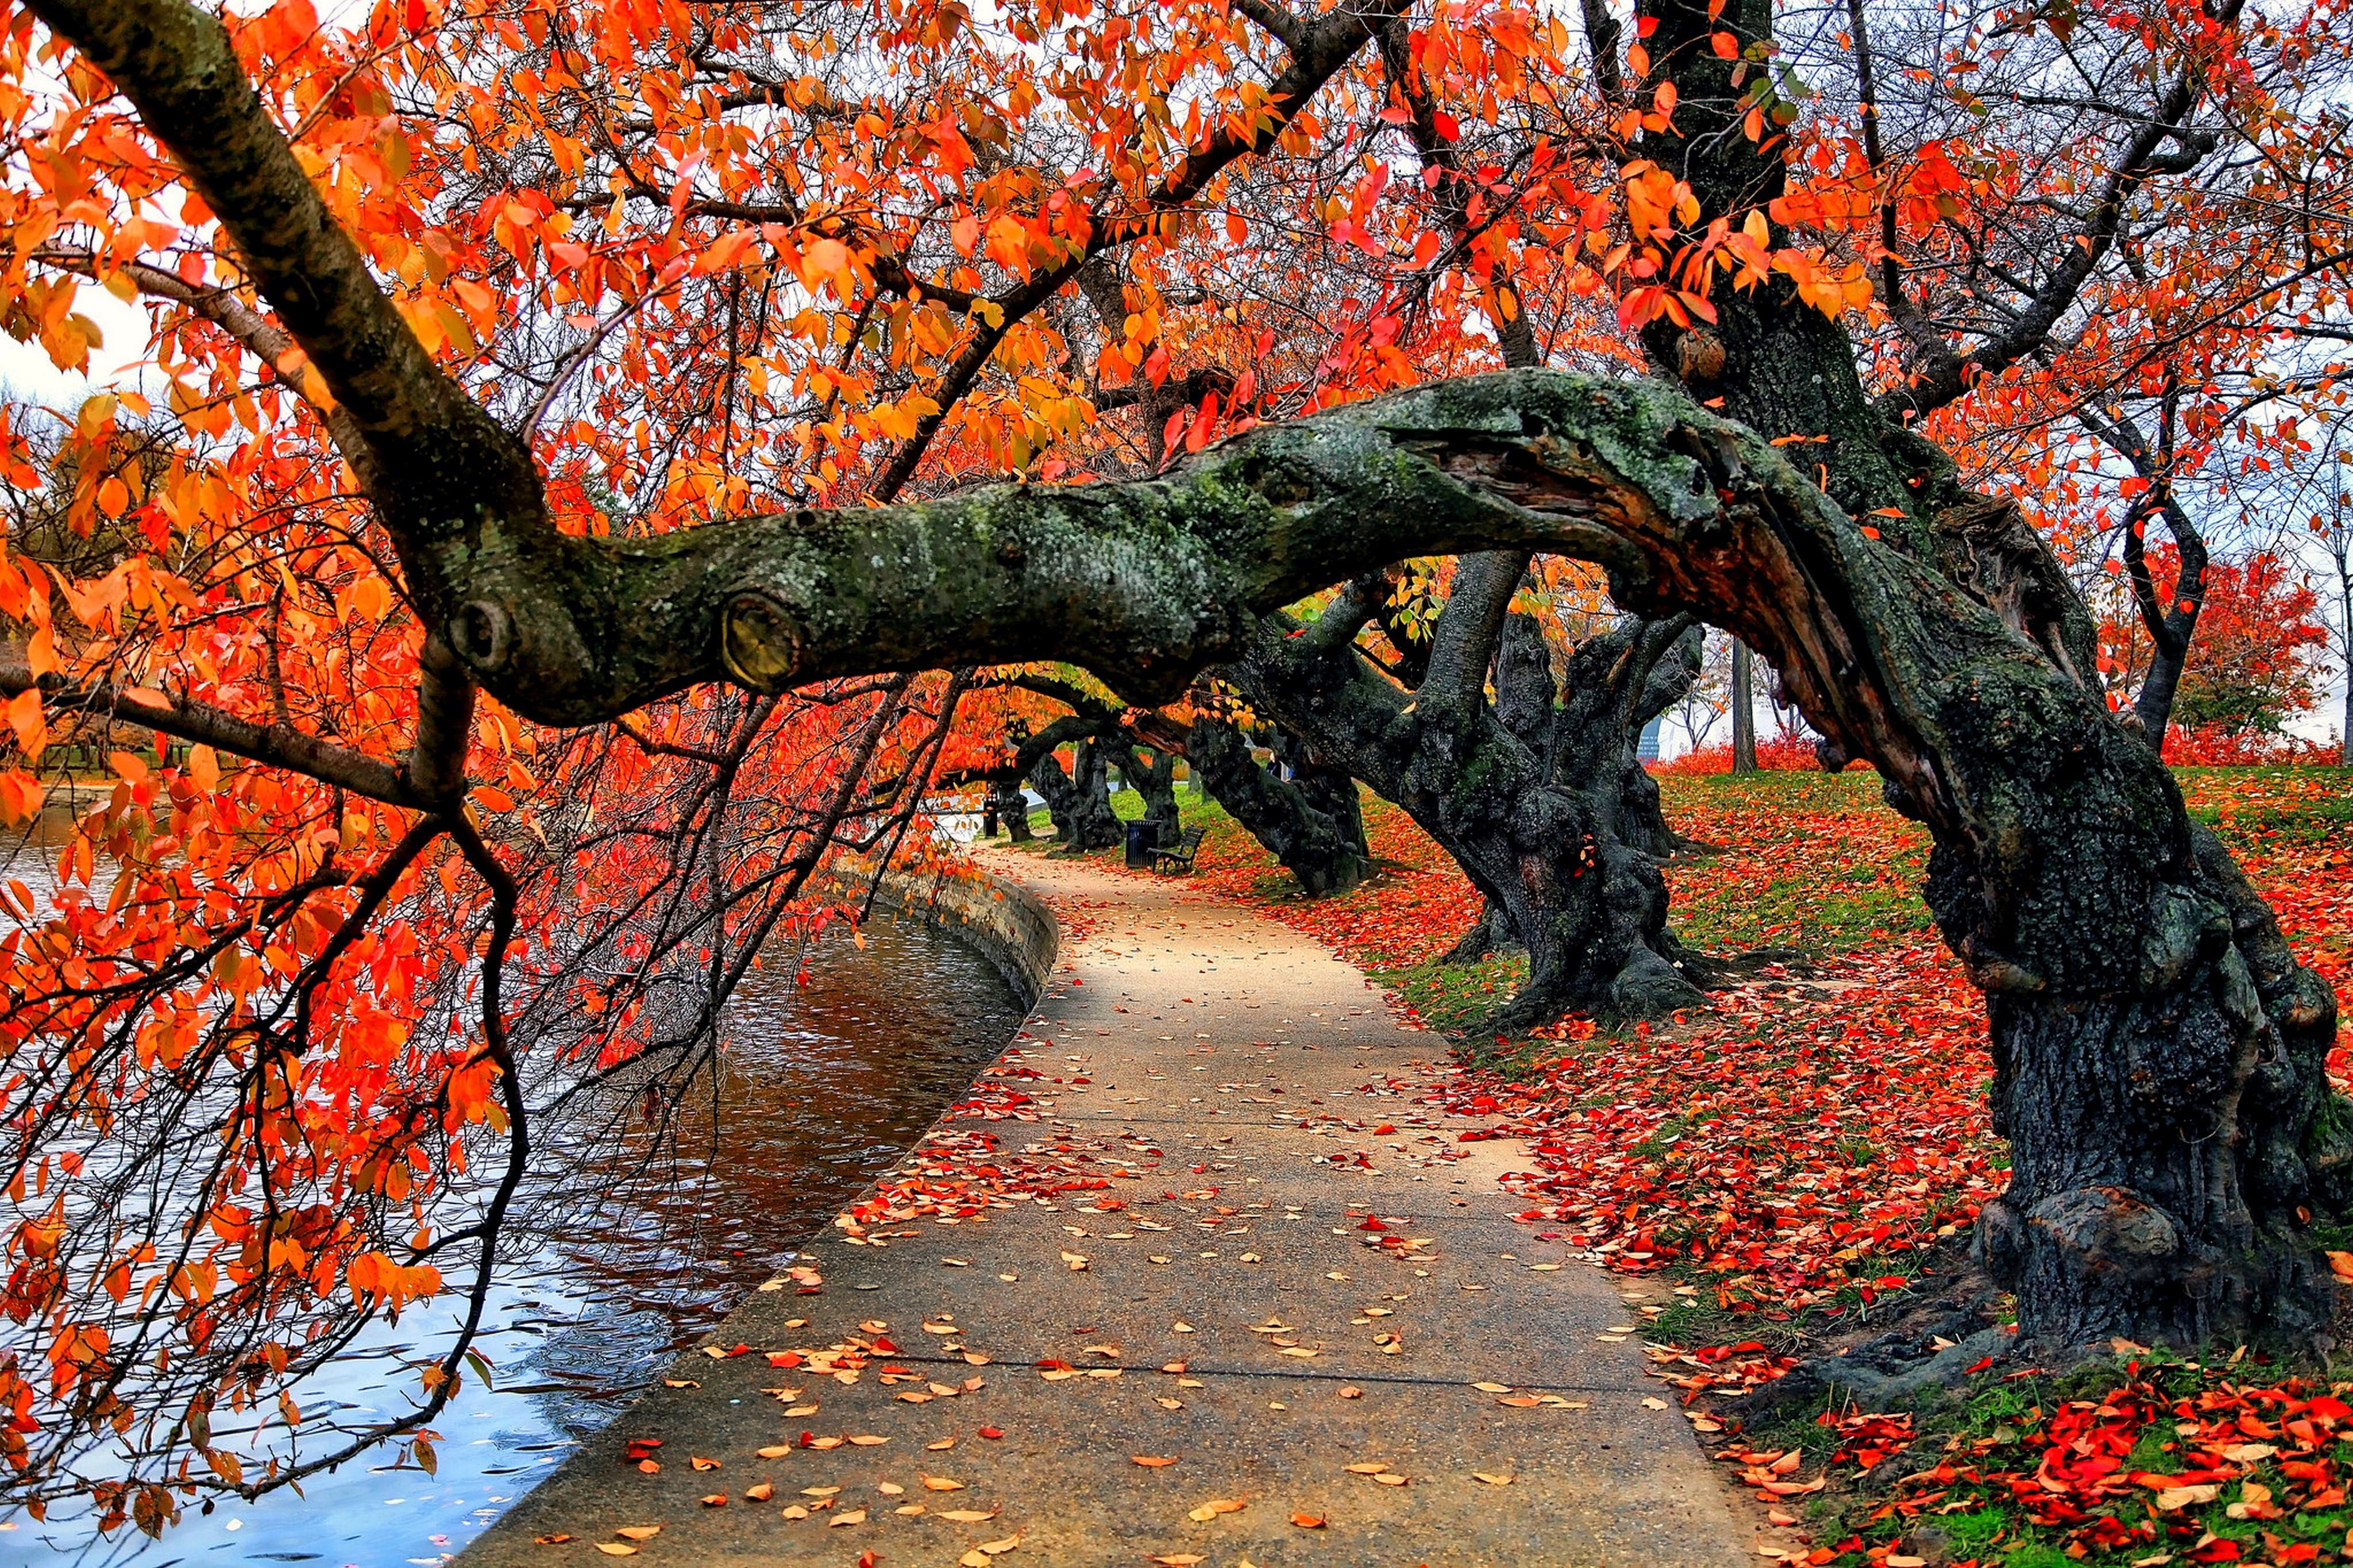 orange leafed trees, trees near body of water, nature, fall, leaves